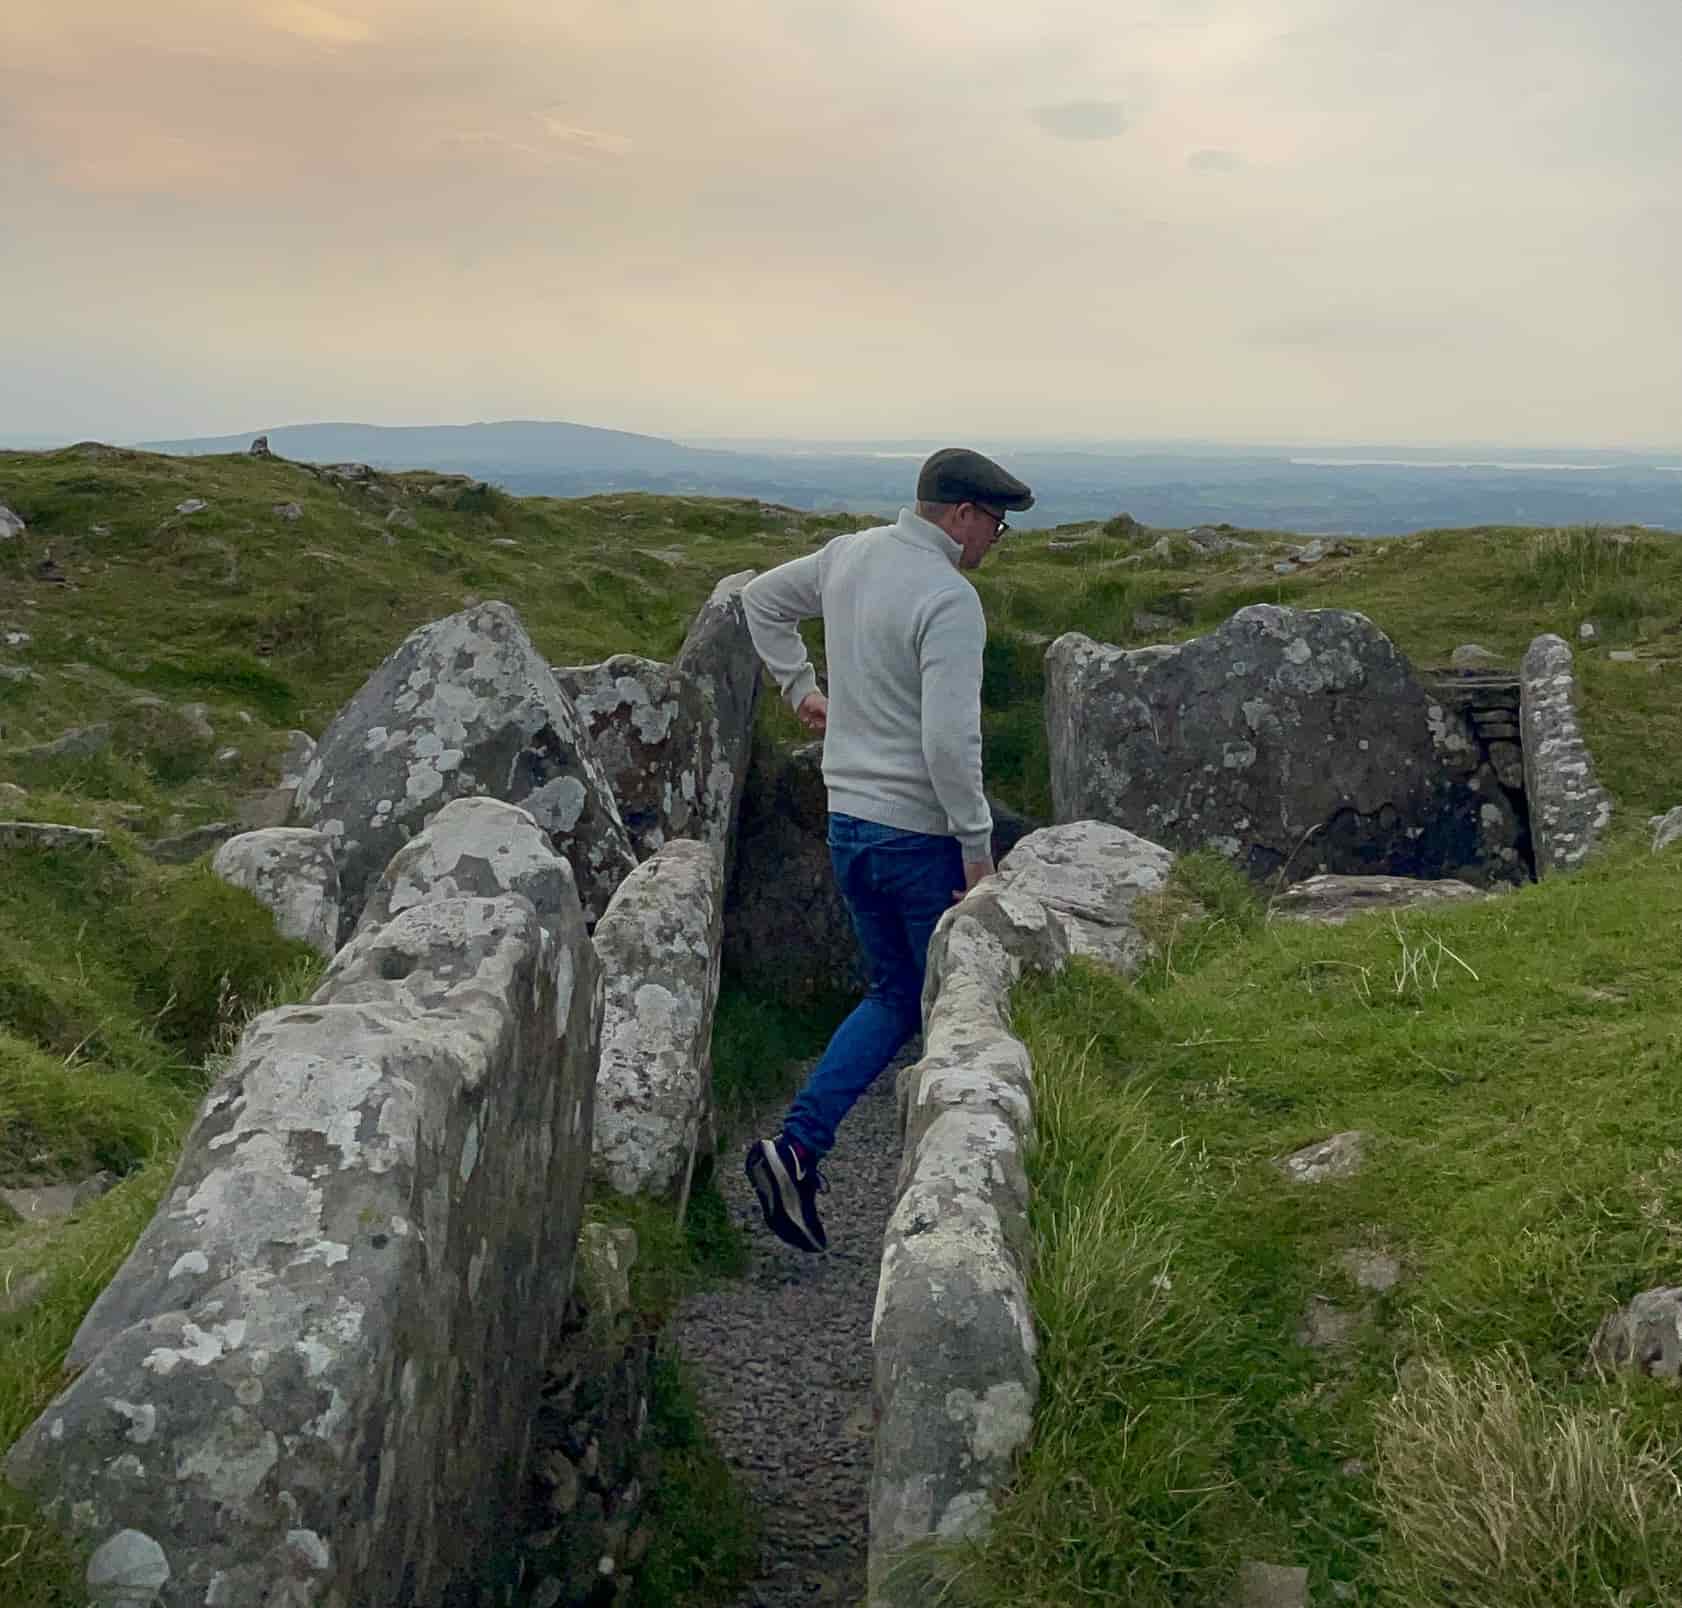 Loughcrew Cairns Megalithic Site in Ireland